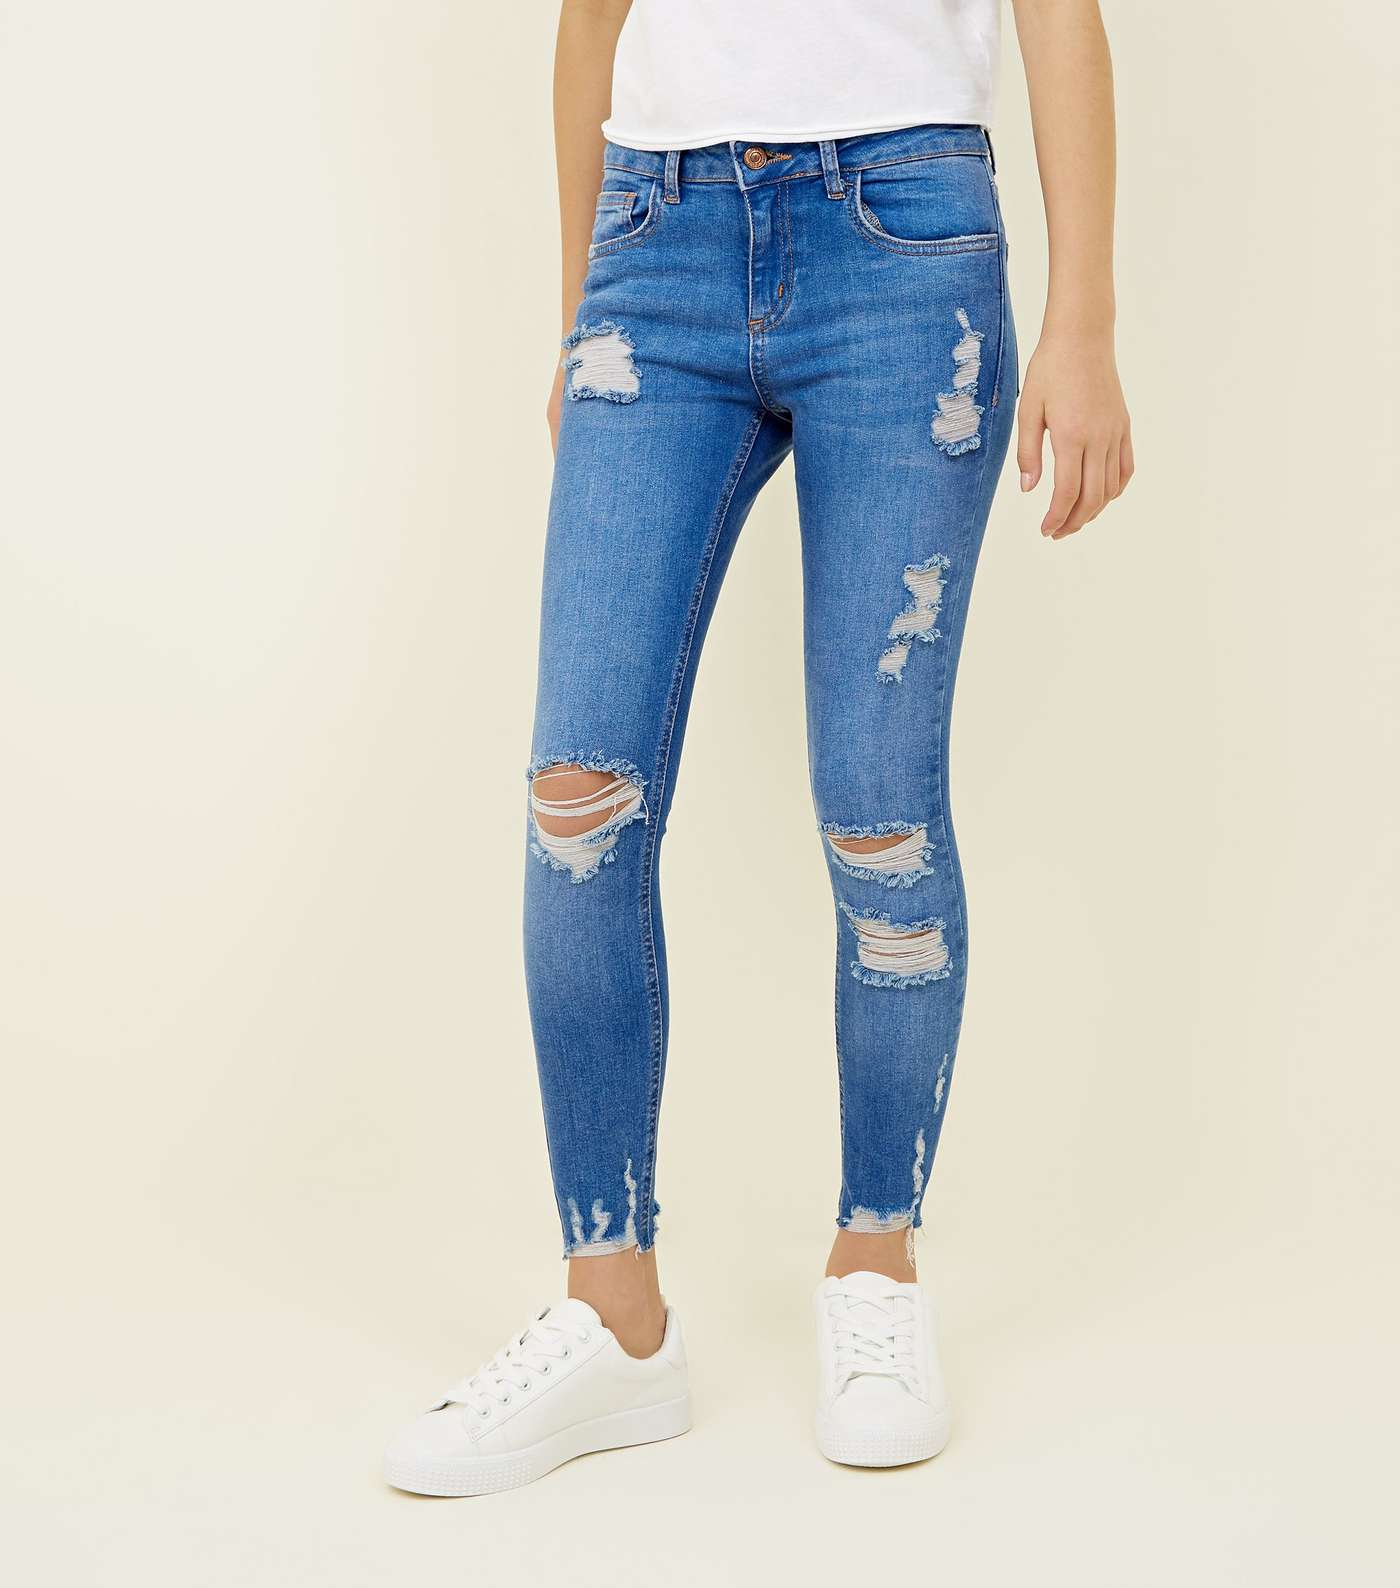 Girls Bright Blue Ripped Skinny Jeans Image 2